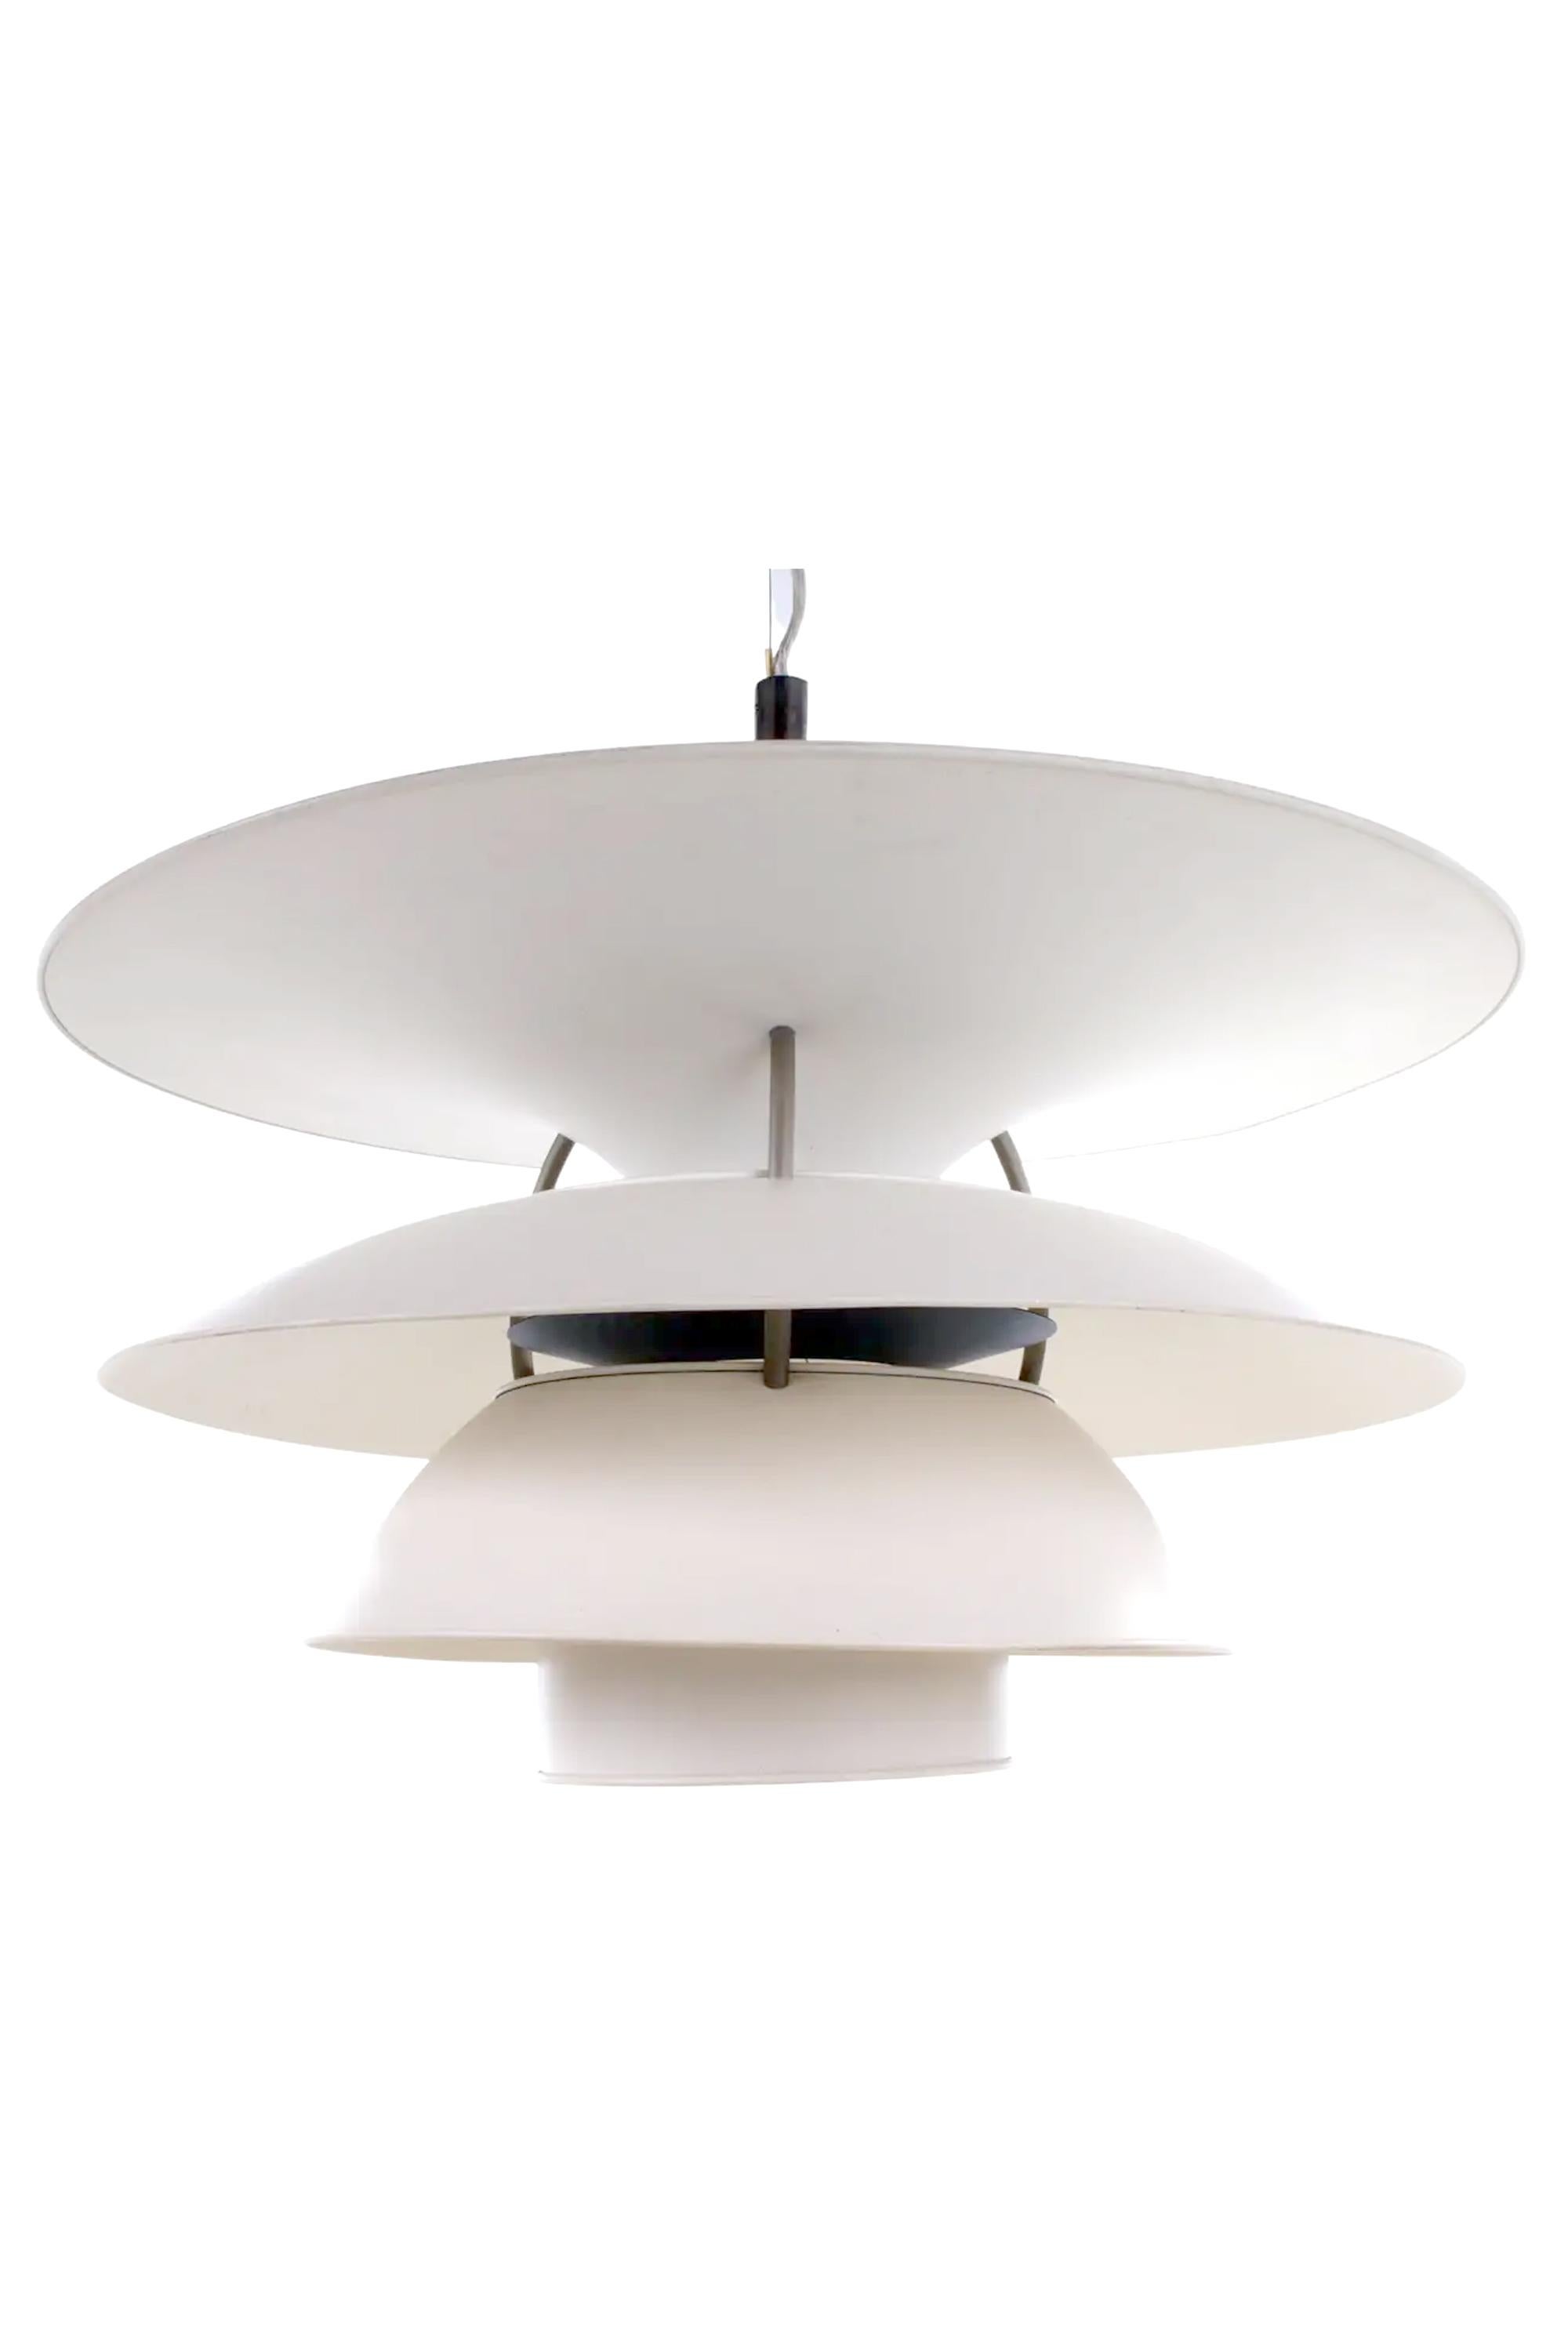 The Charlottenborg pendant lamp is a famous piece of Danish design. Designed by Poul Henningsen for the Danish company Louis Poulsen around the 1960s.

The lamp consists of four large white lampshades made of white lacquered metal and a smaller blue